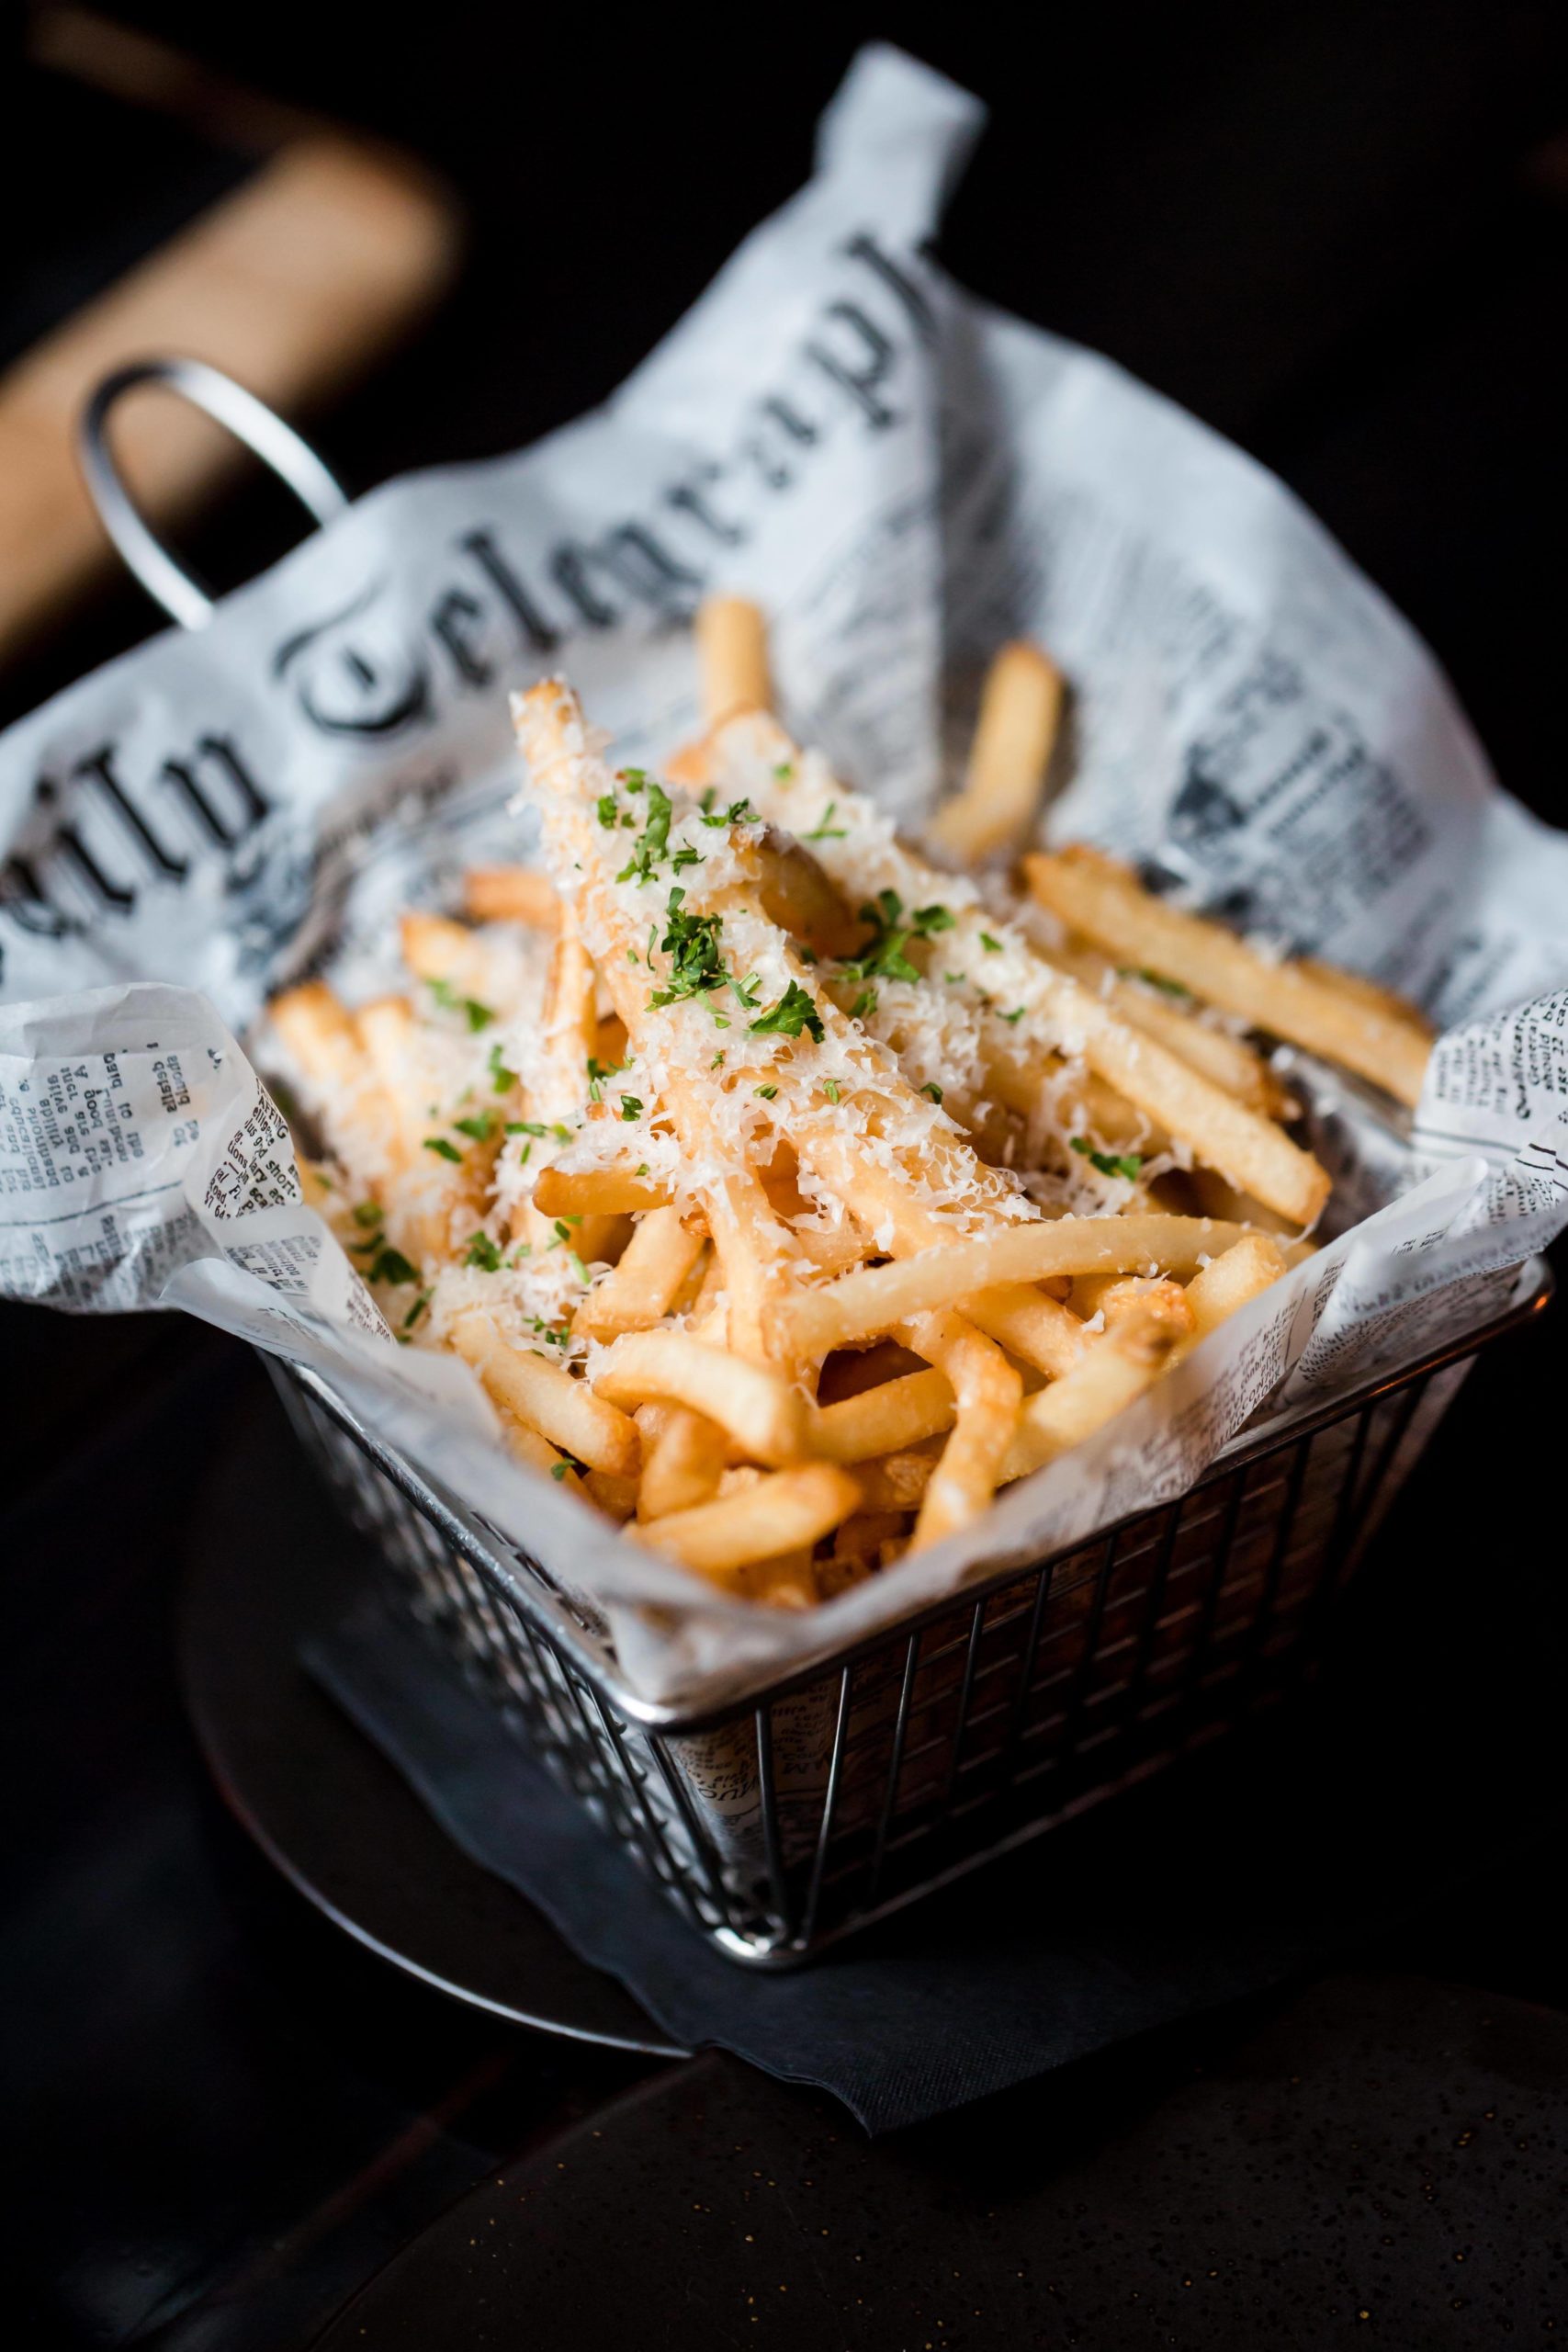 Bountiful harvest Parmesan fries for foodservice